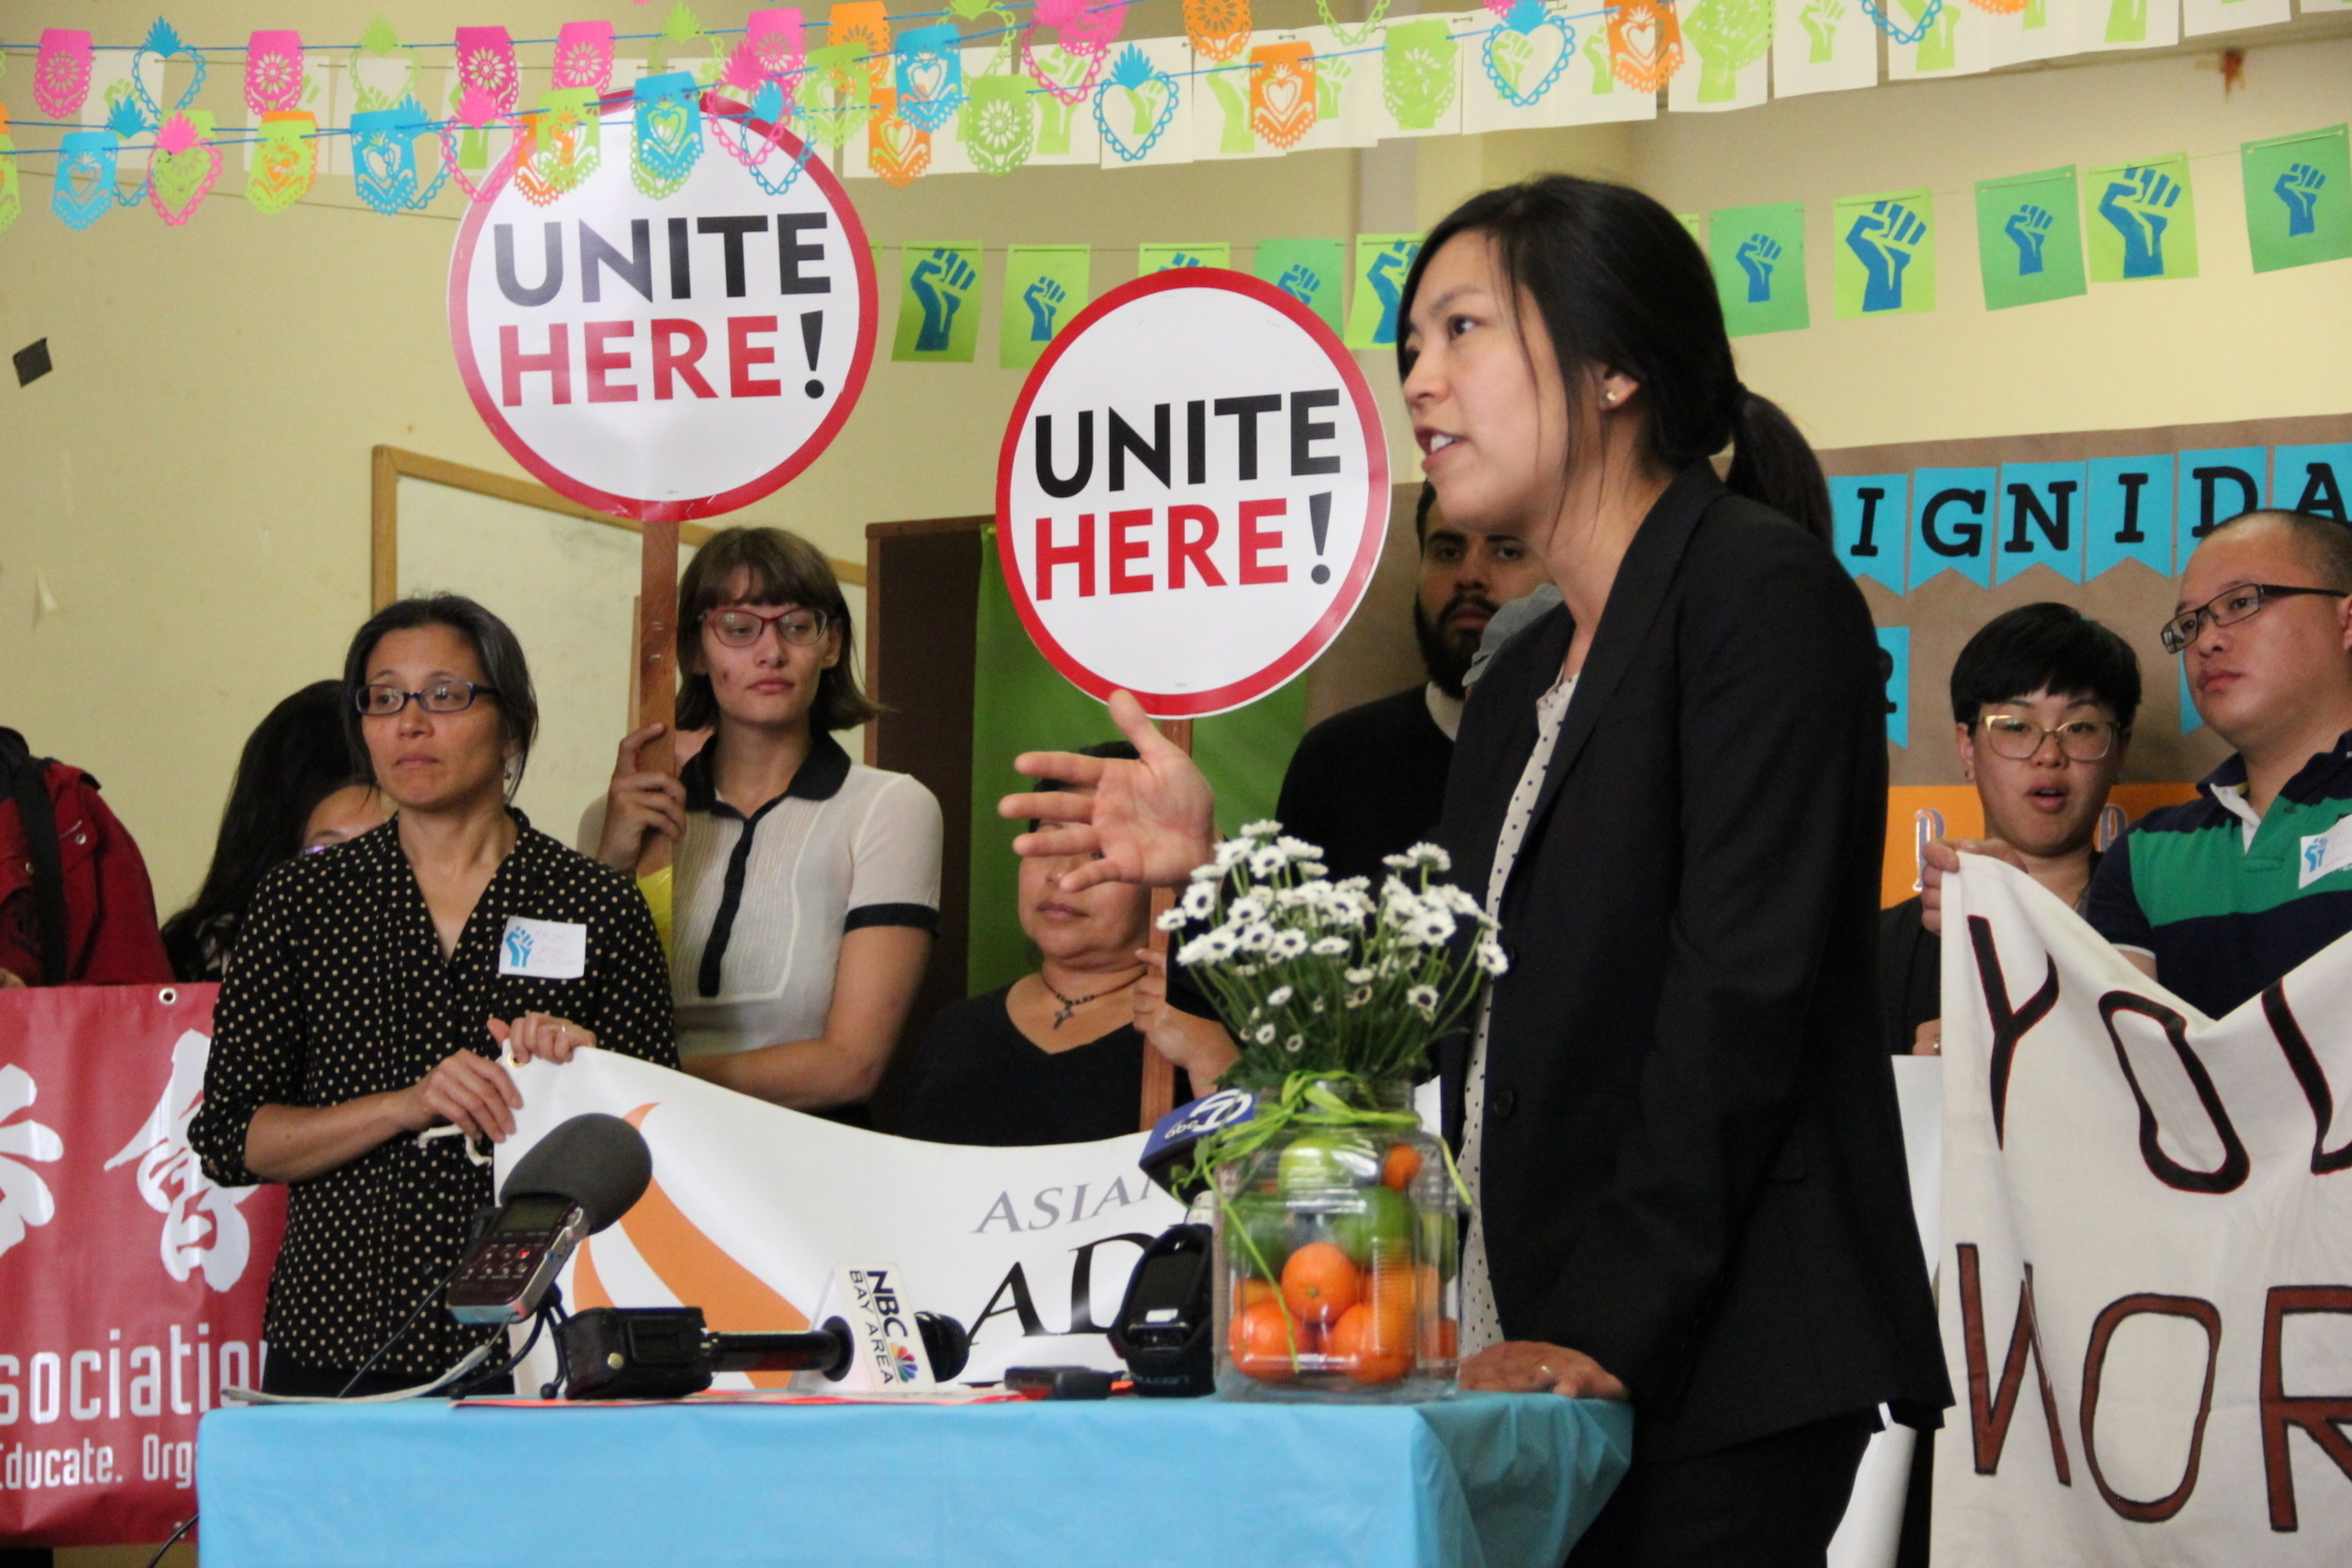 ALC attorney WInnie Kao speaks at a press conference behind a table with microphones and a vase with oranges and flowers. Behind her colorful bunting hangs from the ceilings and people hold banners and signs saying "Unite Here!"